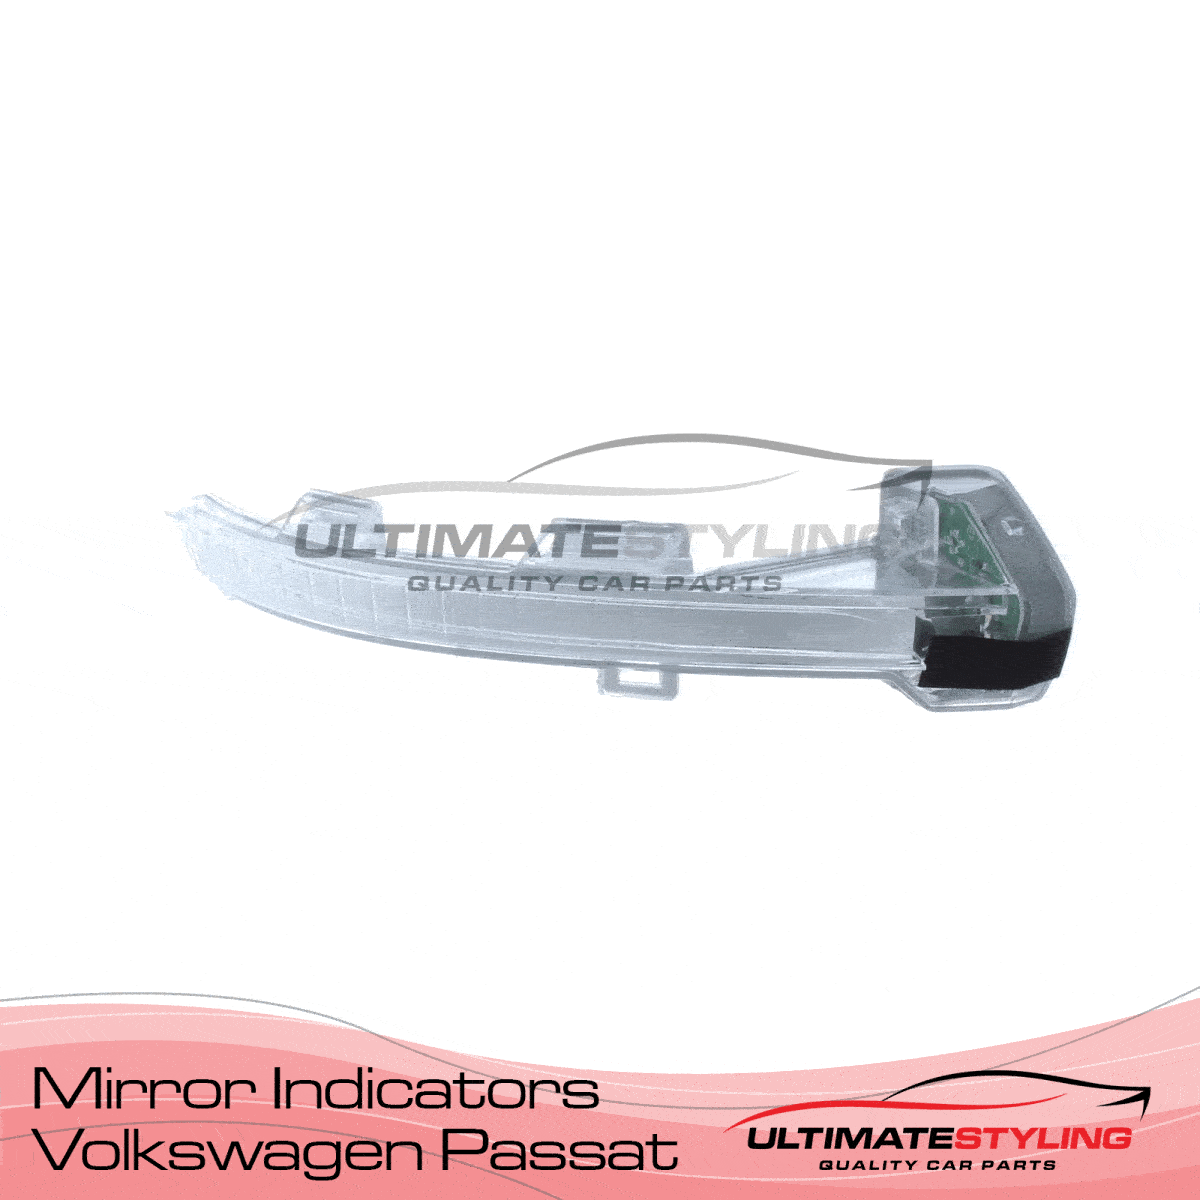 360 view of a VW Passat wing mirror indicator replacement